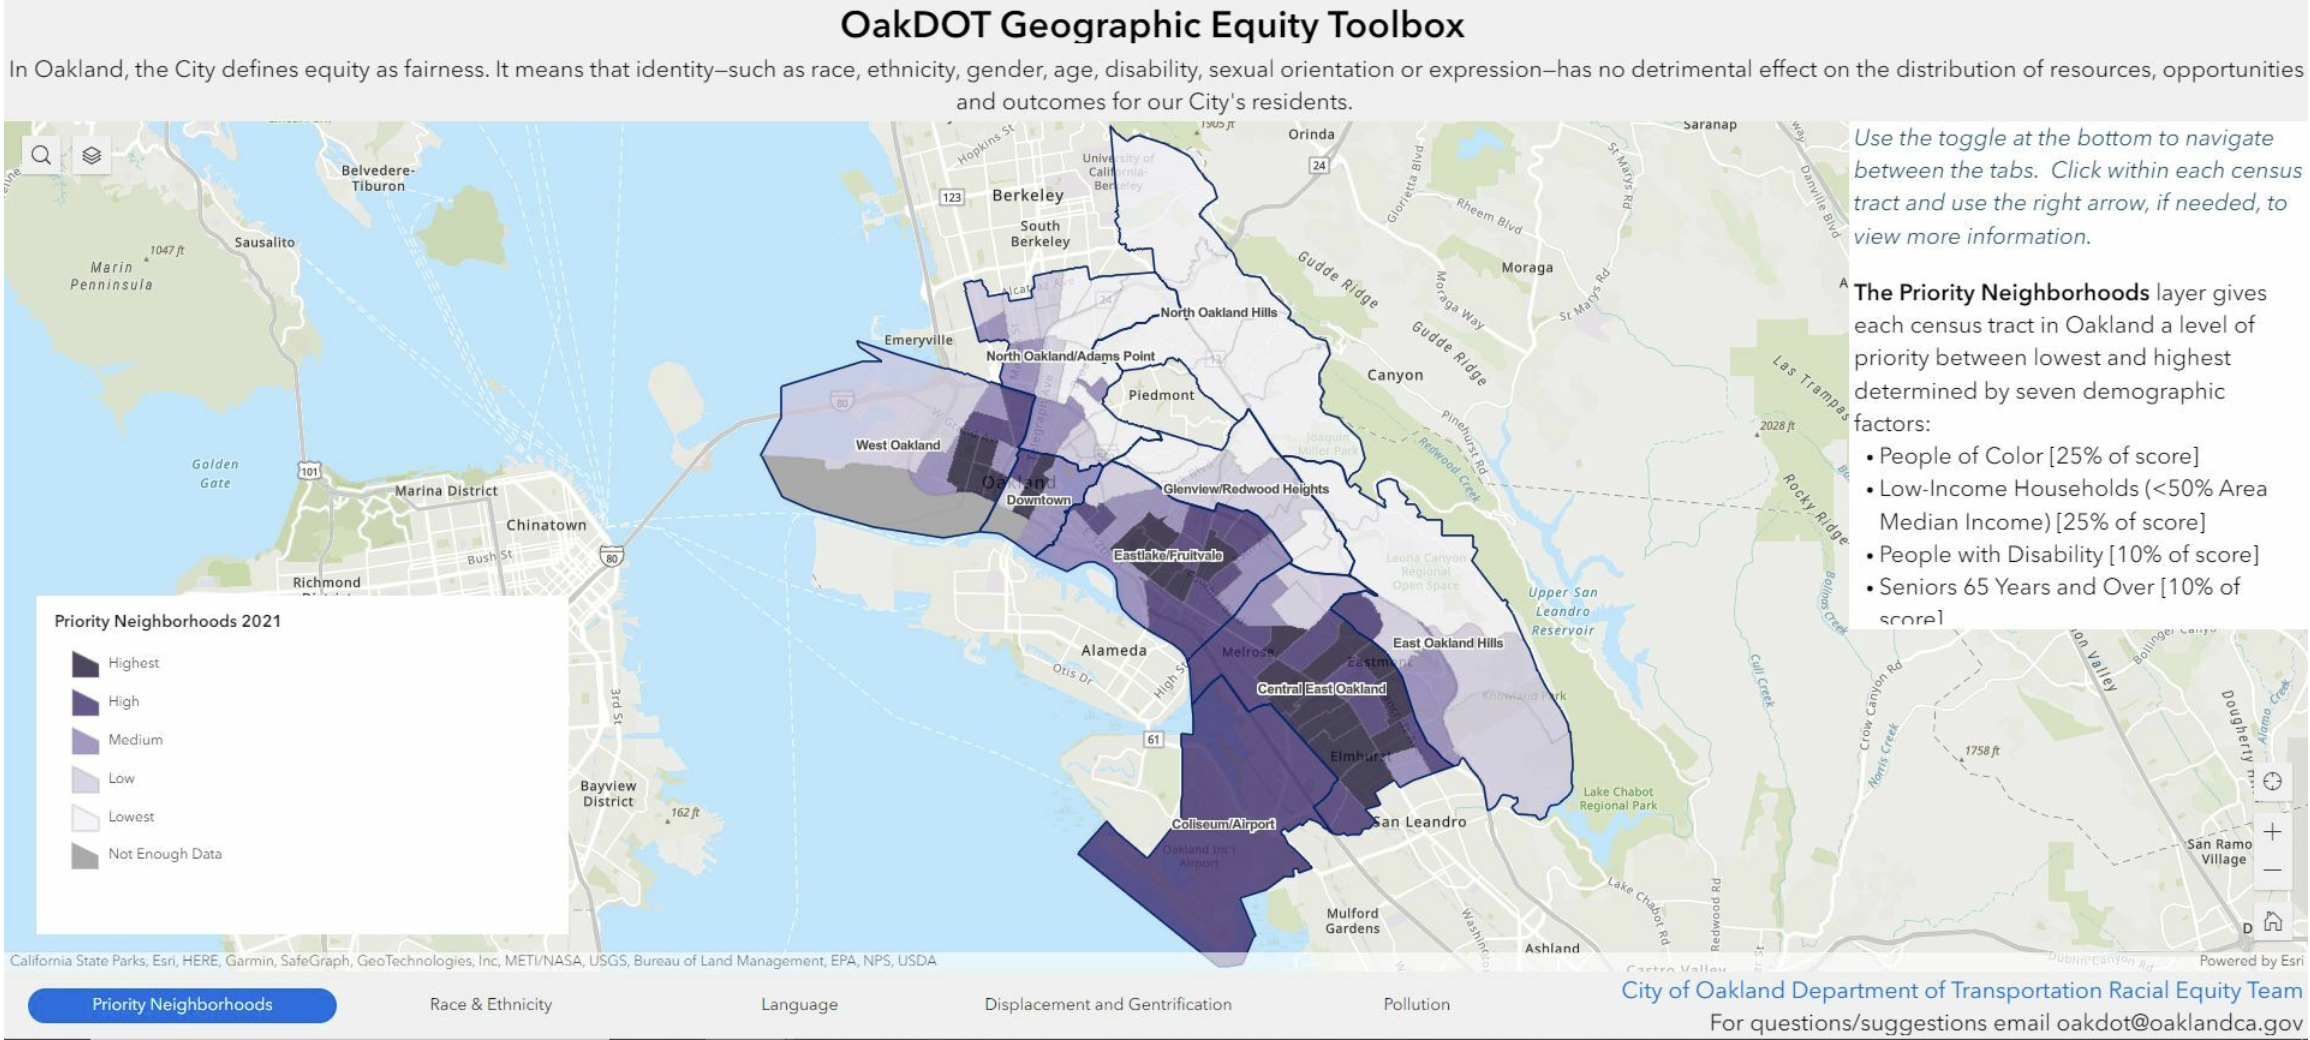 Front page of the OakDOT Geographic Equity Toolbox 